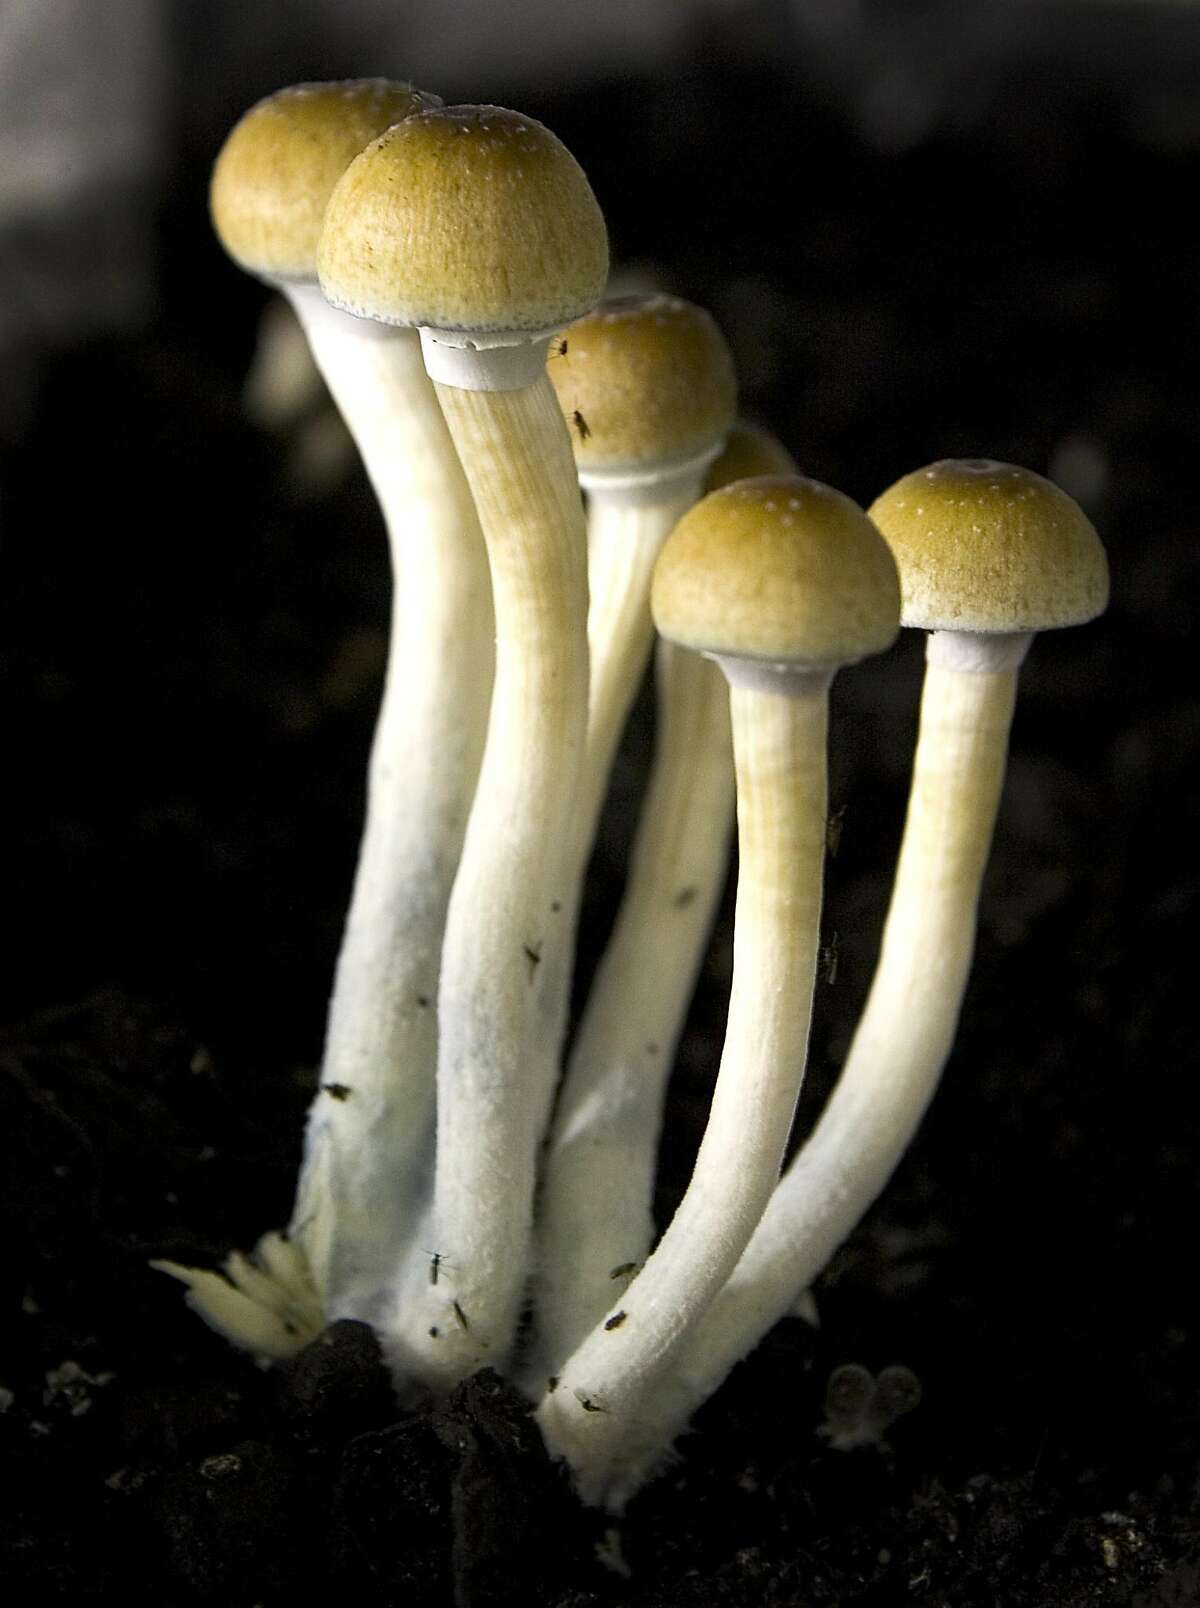 (FILES) In this file photo taken on March 28, 2007, mushrooms from the Procare farm in Dorp near The Hague are pictured 28 March 2007. - Denver on May 8, 2019, became the first US city to decriminalize psychedelic mushrooms, as voters approved a ballot initiative by a razor thin margin. The new ordinance loosens restrictions on the personal use and possession of psilocybin mushrooms, also known as "magic mushrooms," by people over the age of 21. (Photo by Evert-Jan Daniels / ANP / AFP)EVERT-JAN DANIELS/AFP/Getty Images